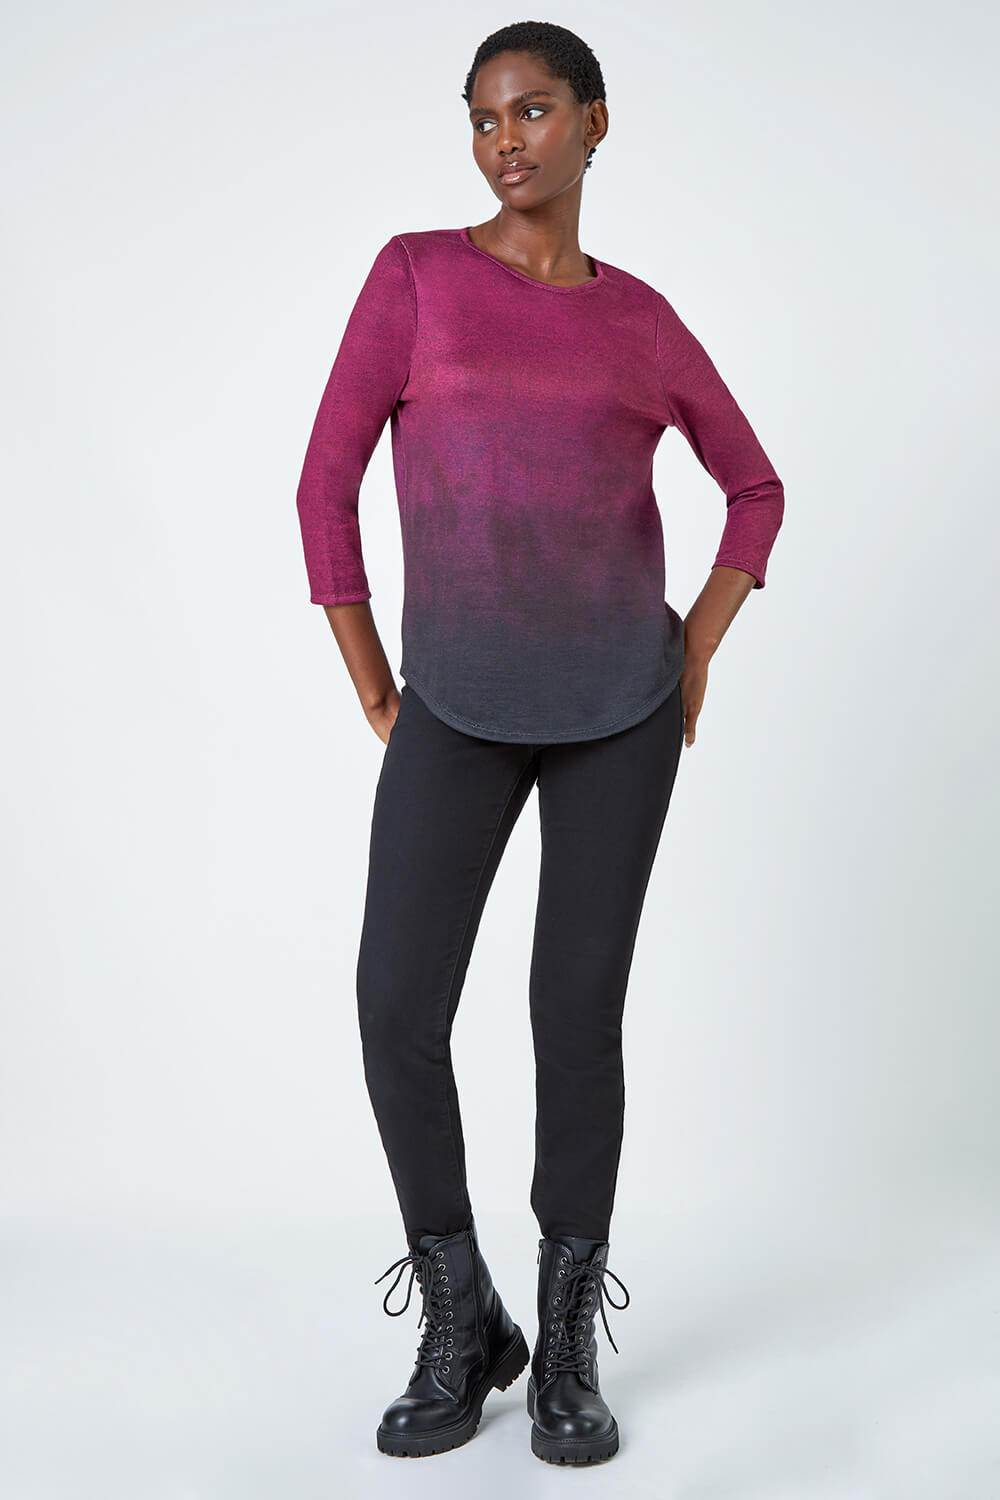 PINK Ombre Print Stretch Top, Image 2 of 5